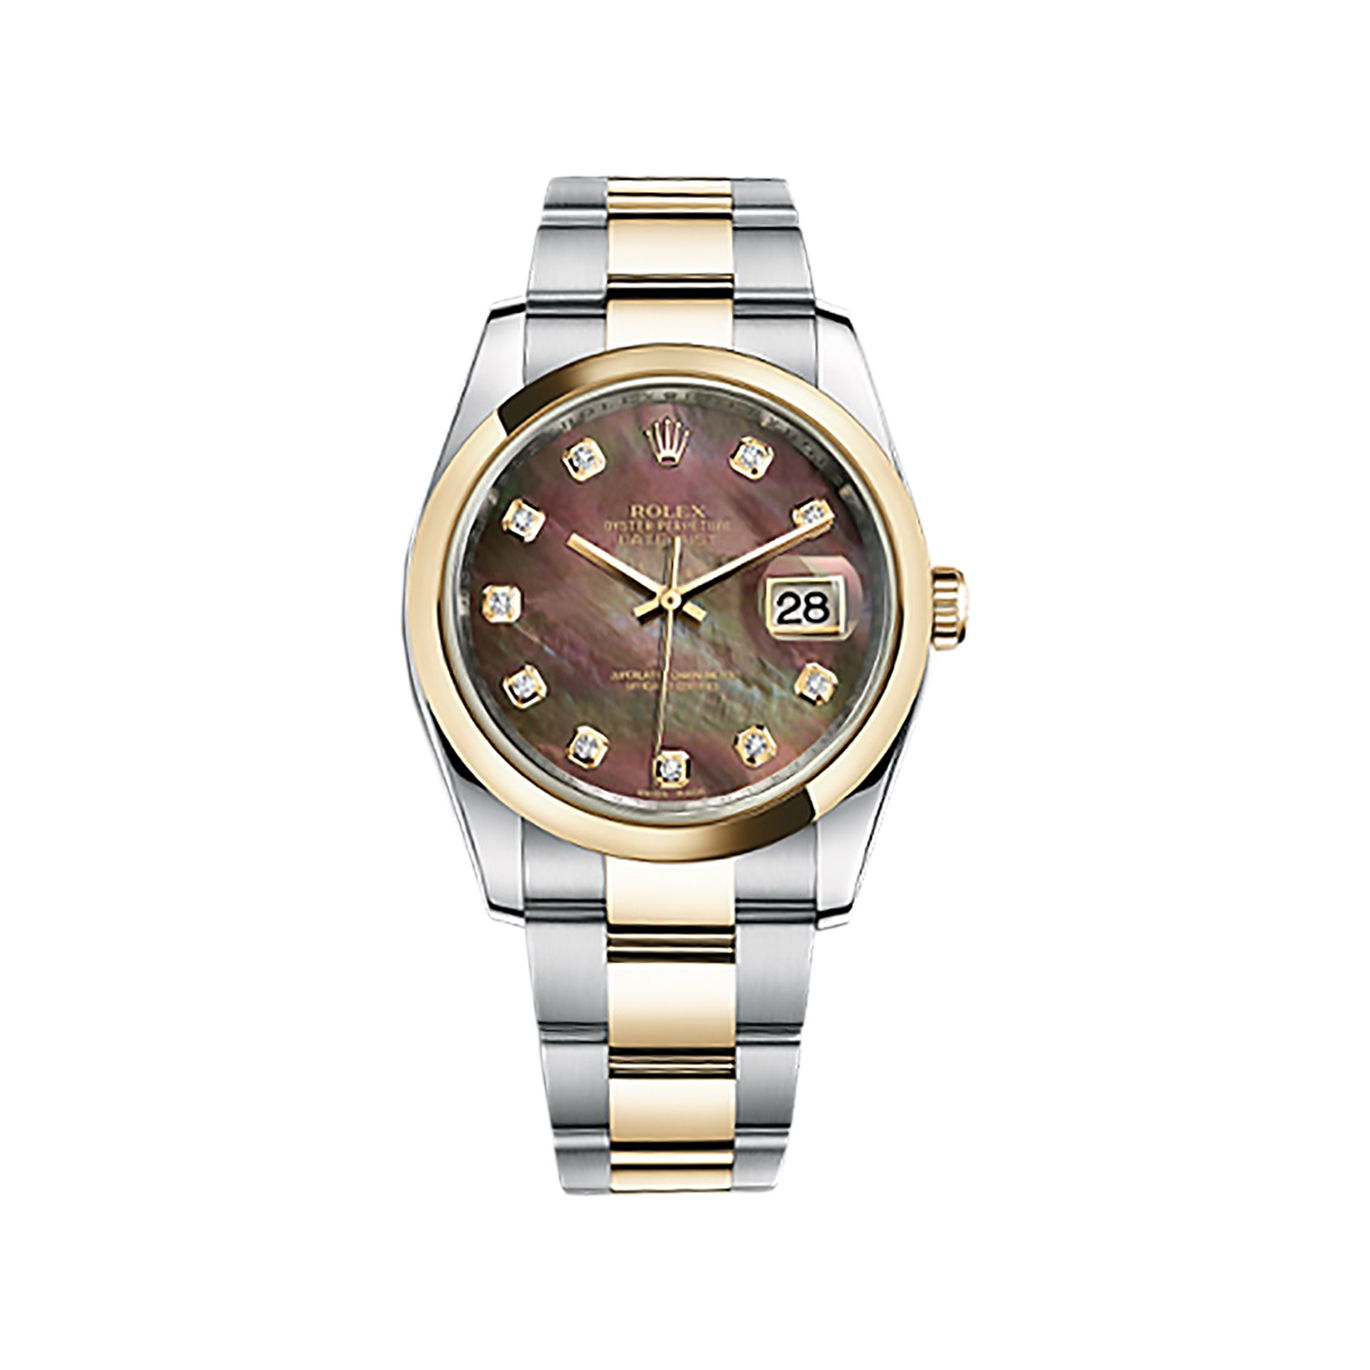 Datejust 36 116203 Gold & Stainless Steel Watch (Black Mother-of-Pearl Set with Diamonds)